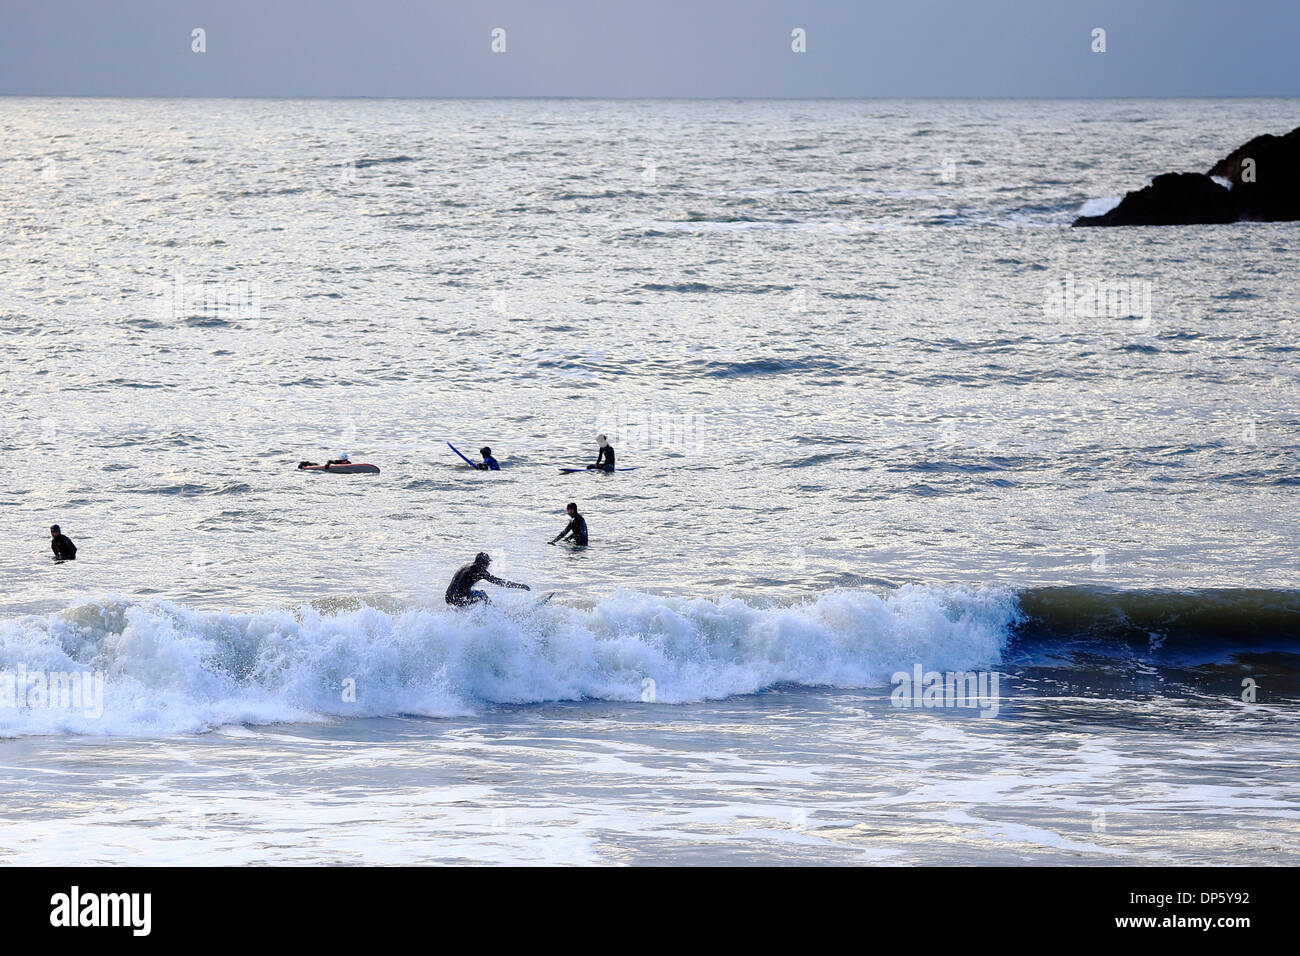 A surfer sihouetted against the sea, rides the waves Stock Photo